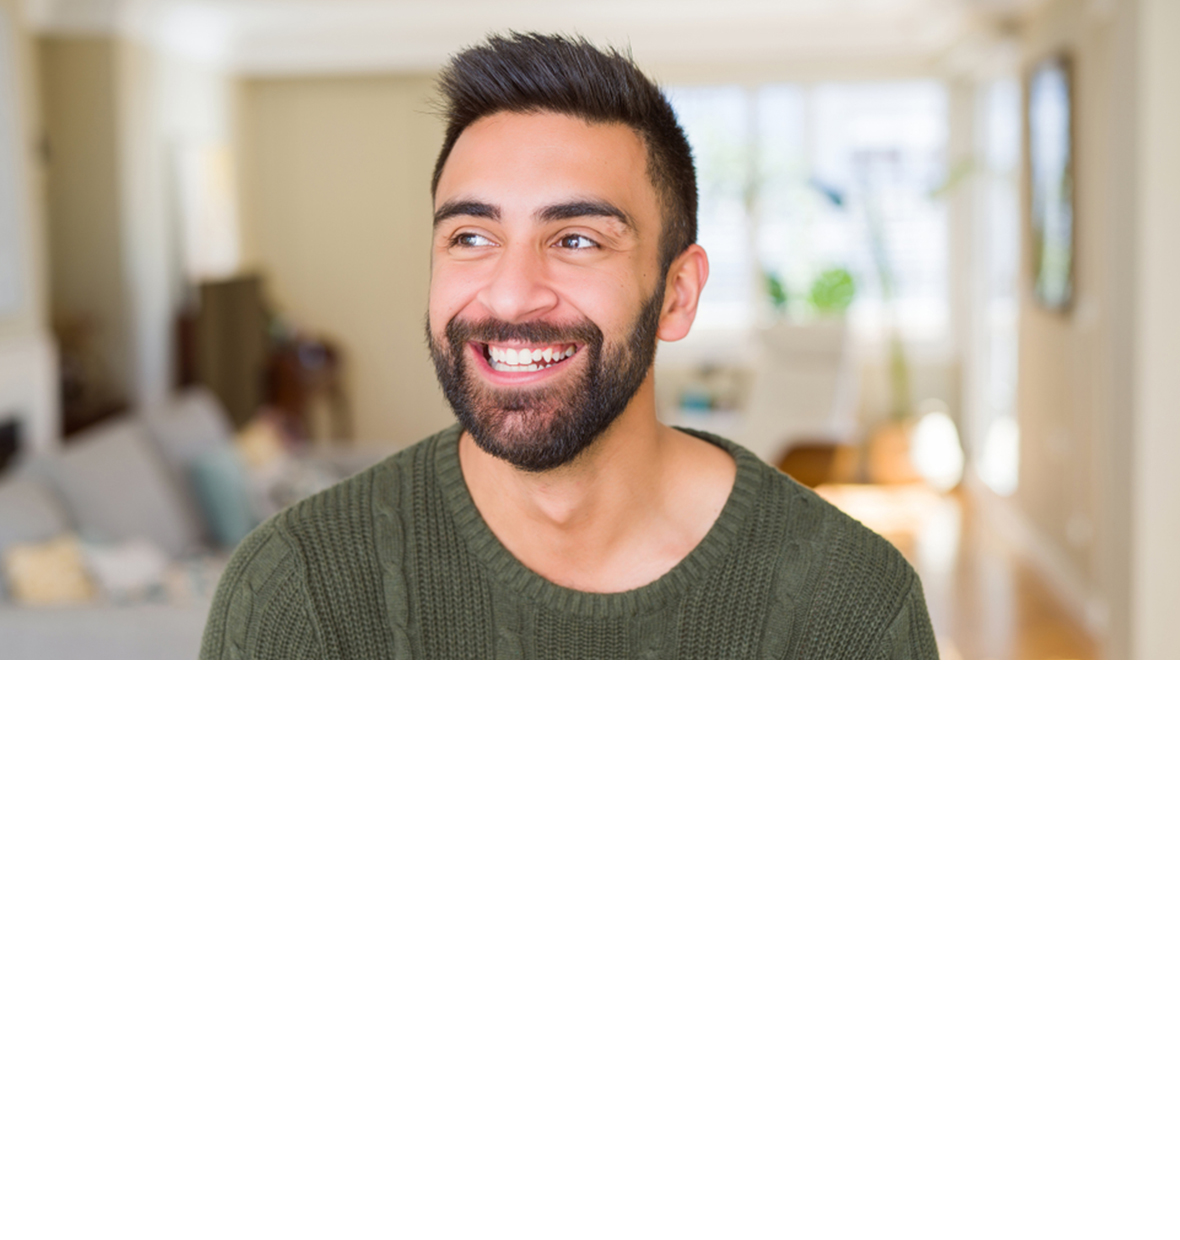 Man with beard smiling to his right